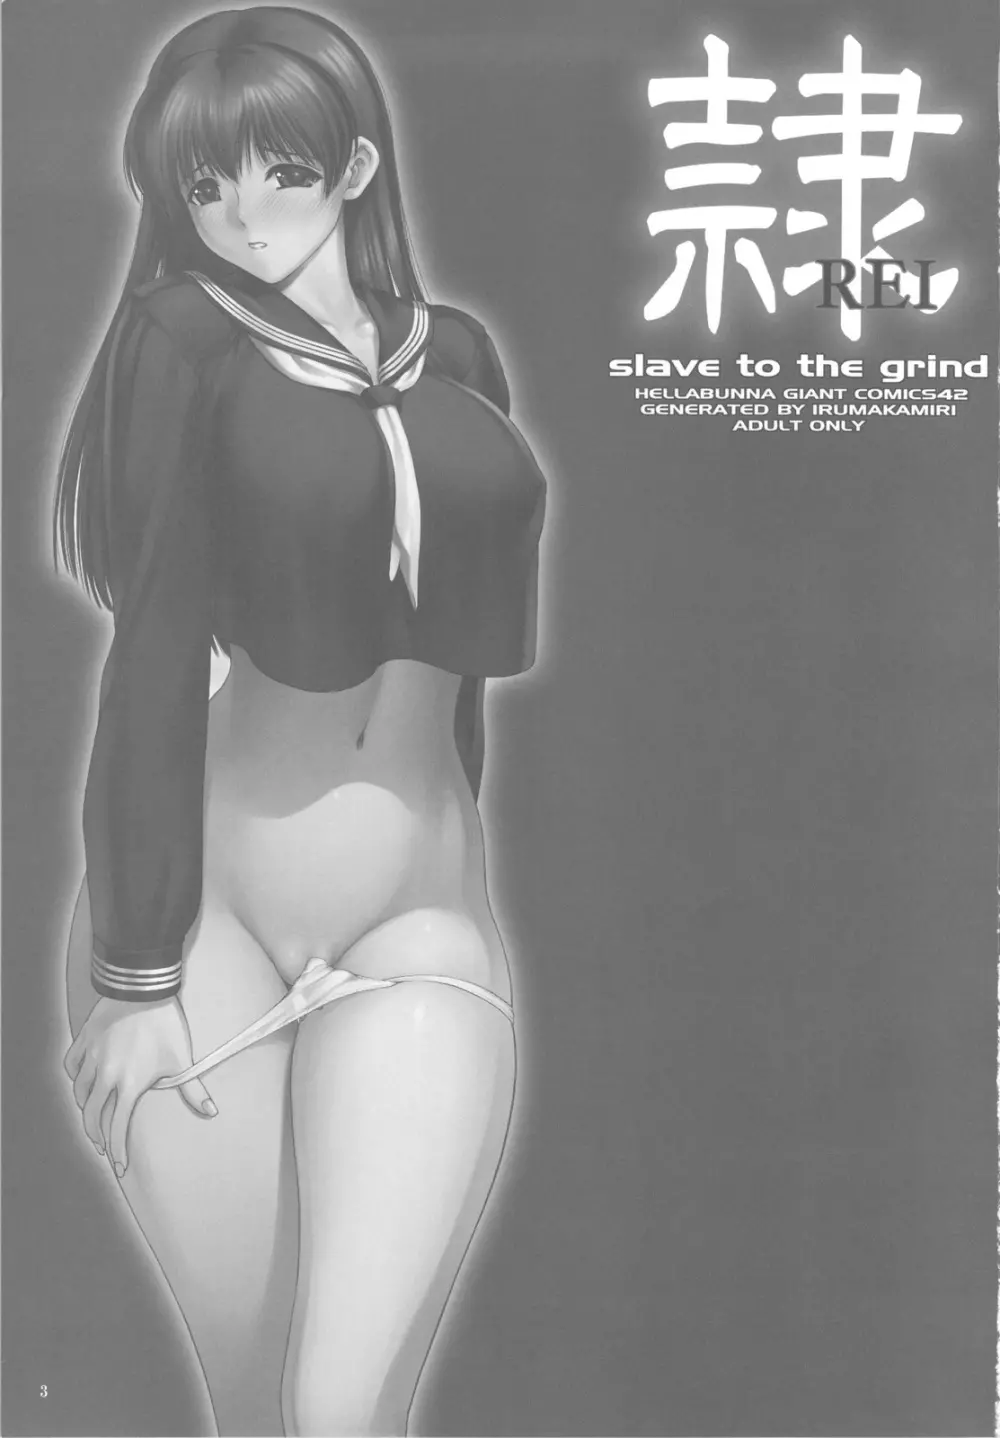 REI07: CHAPTER 06 – Slave to the Grind 3ページ